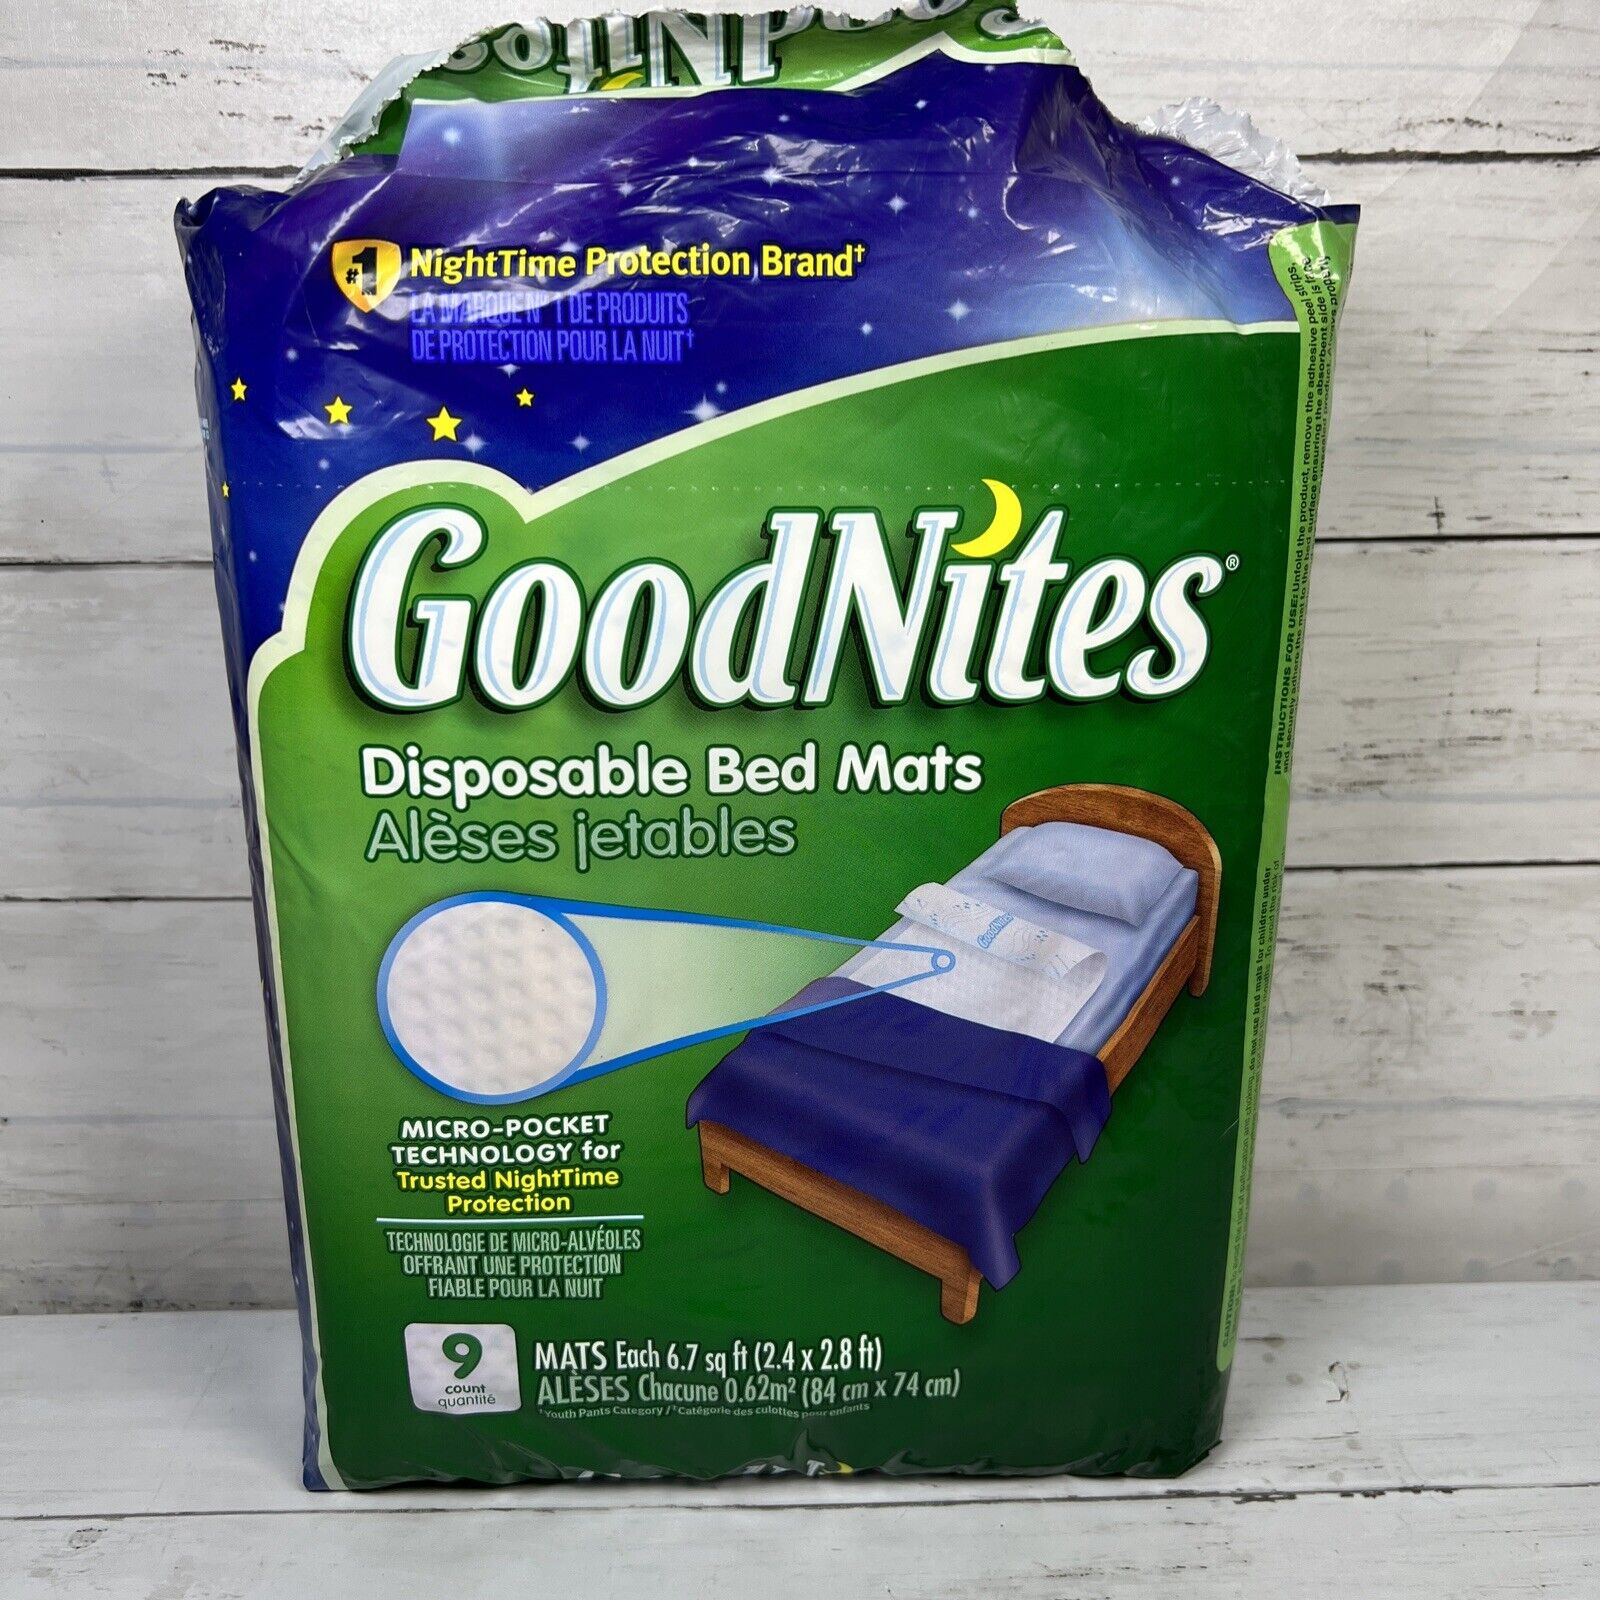 Goodnites Disposable Bed Mats For Bedwetting, Open Pack of 8 Count 2.4 x 2.8 Ft